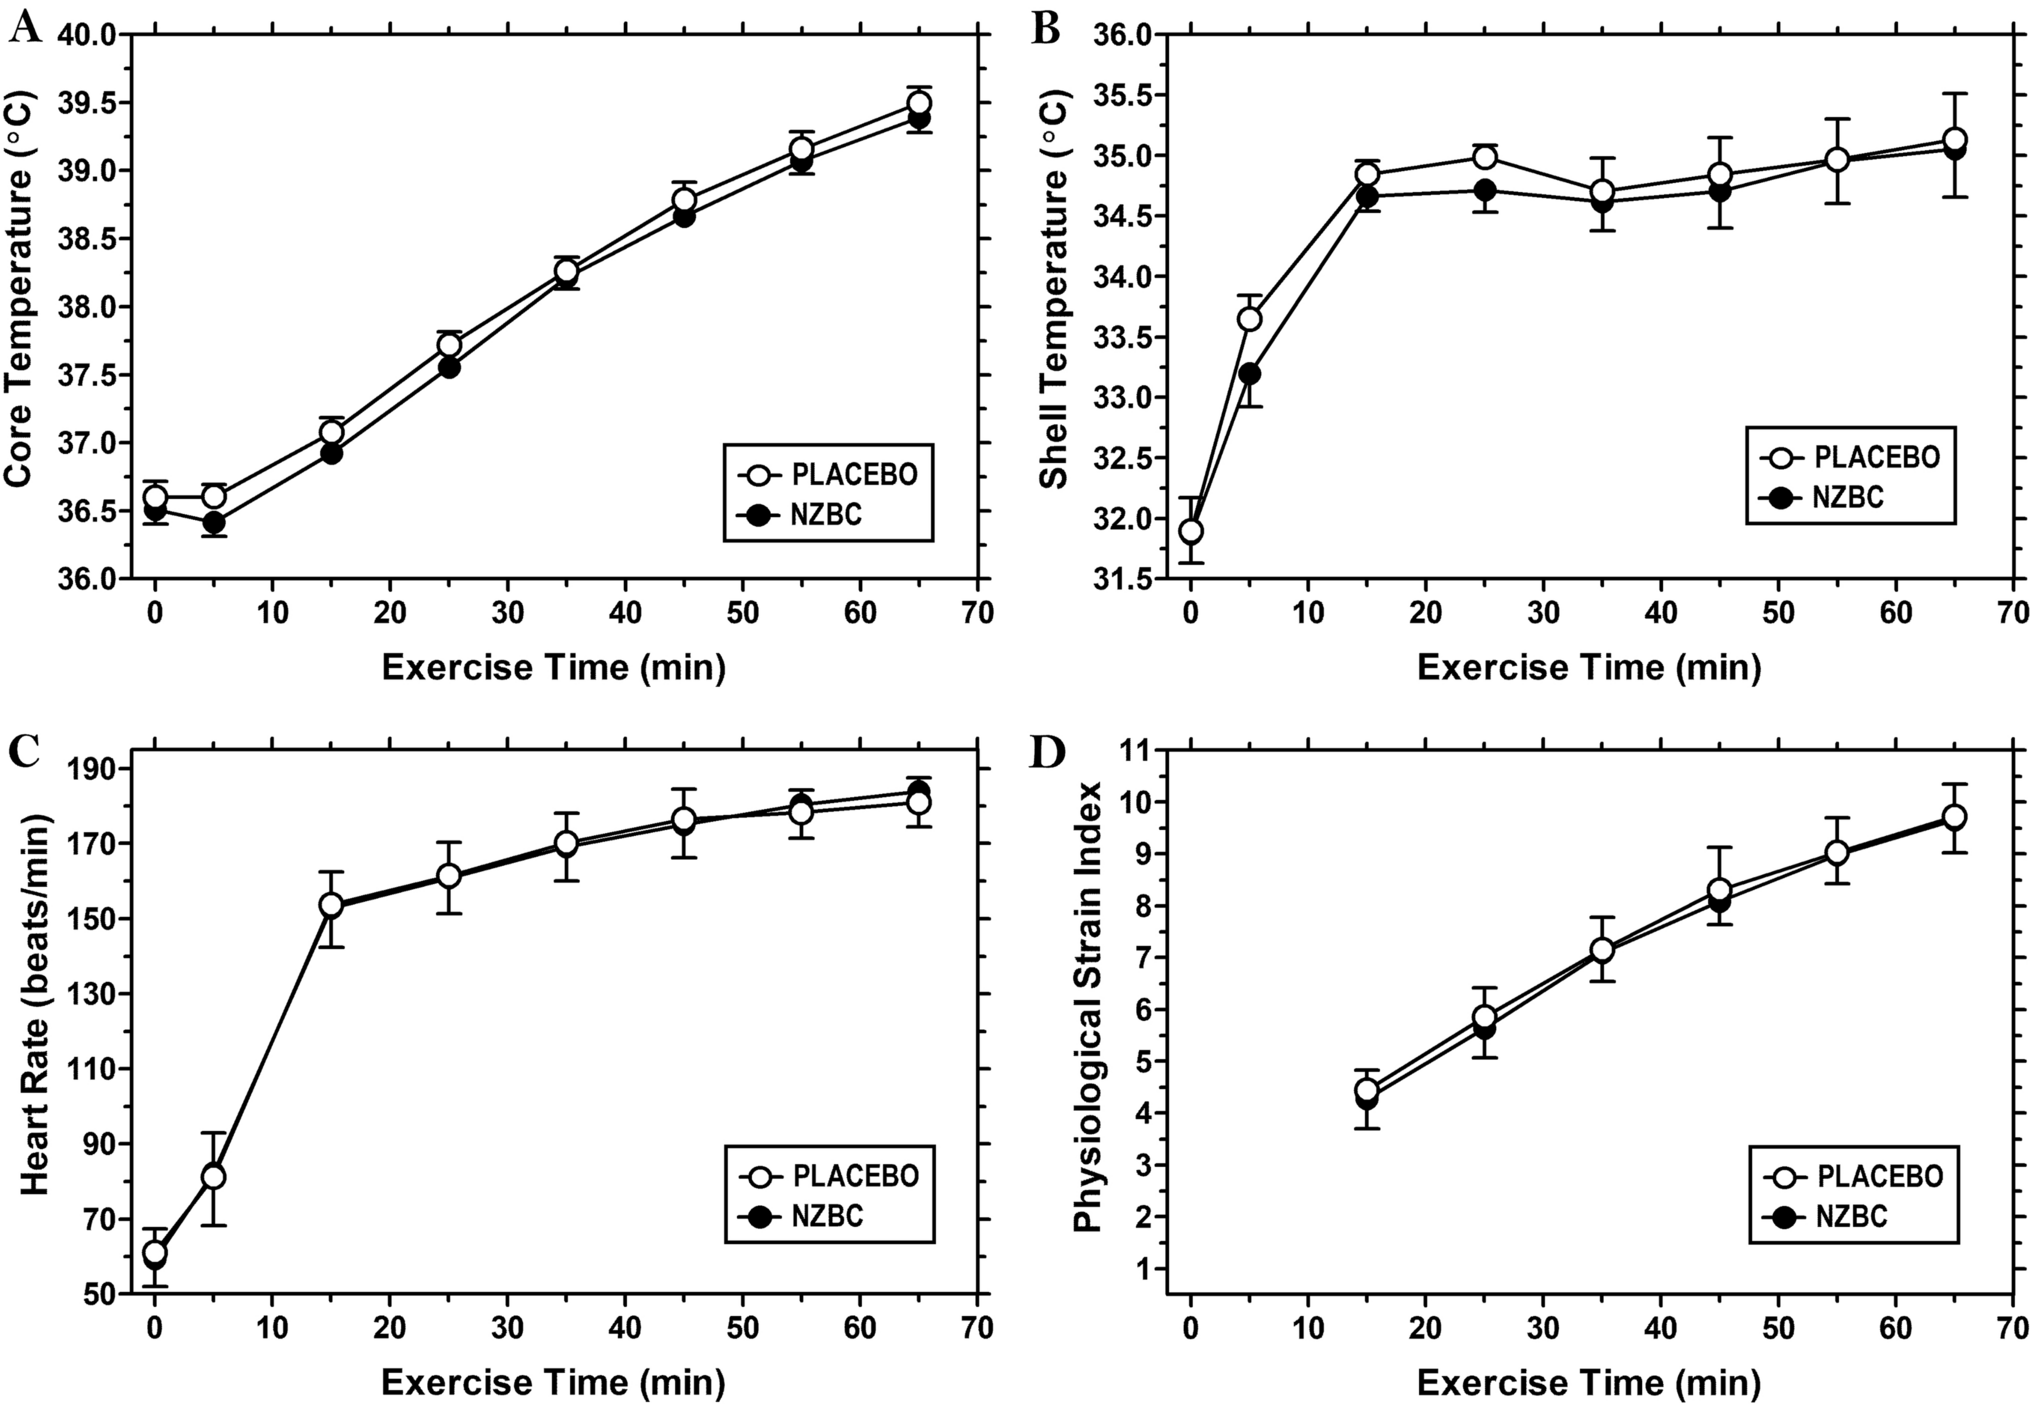 New Zealand blackcurrant extract modulates the heat shock response in men during exercise in hot ambient conditions